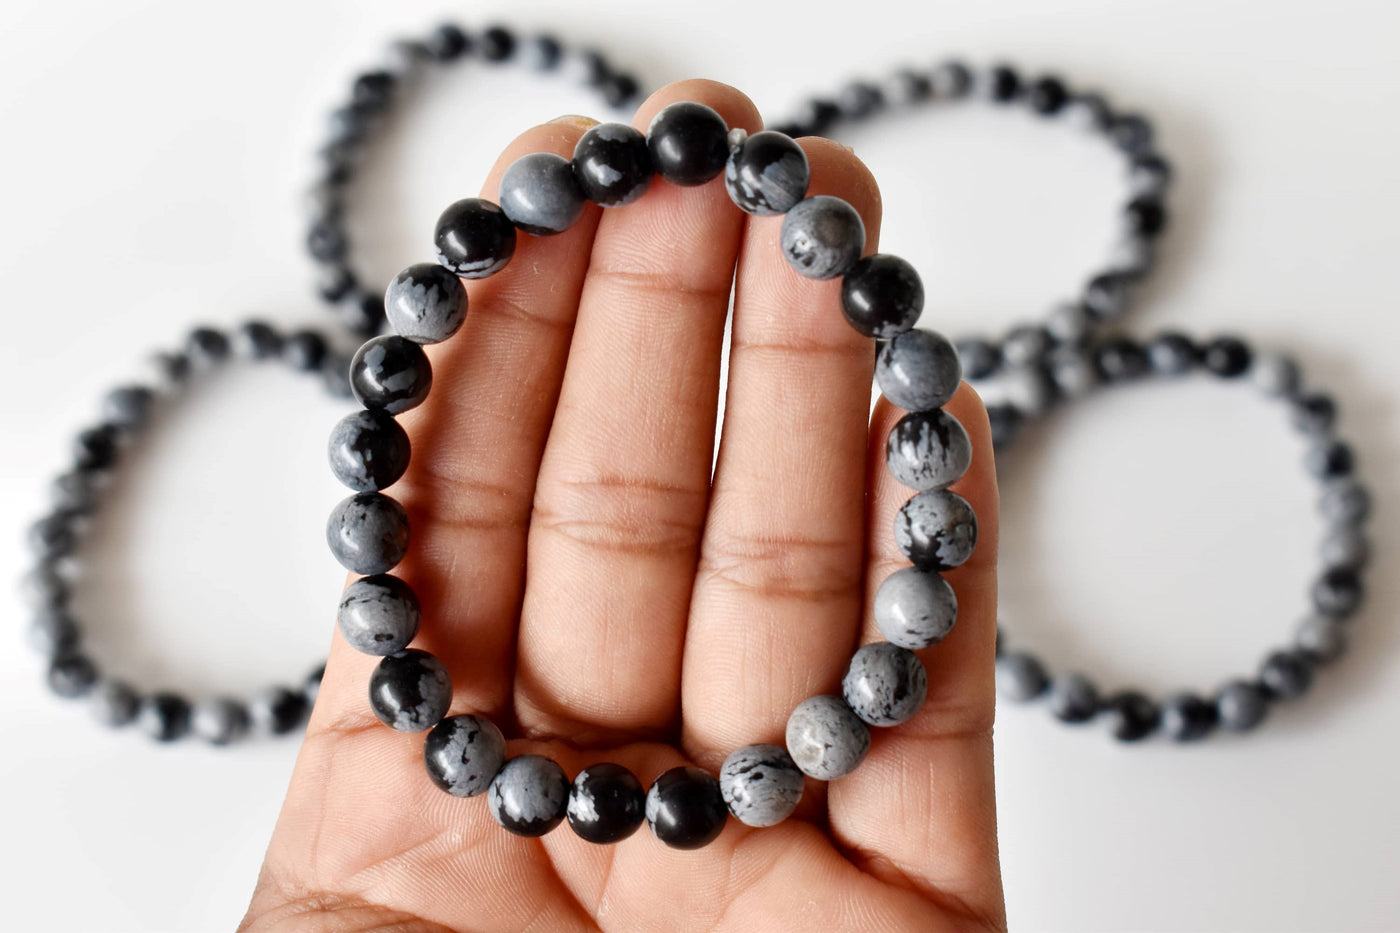 Black Snowflake Obsidian Bracelet (Symbolizing Purity and Inner Peace)